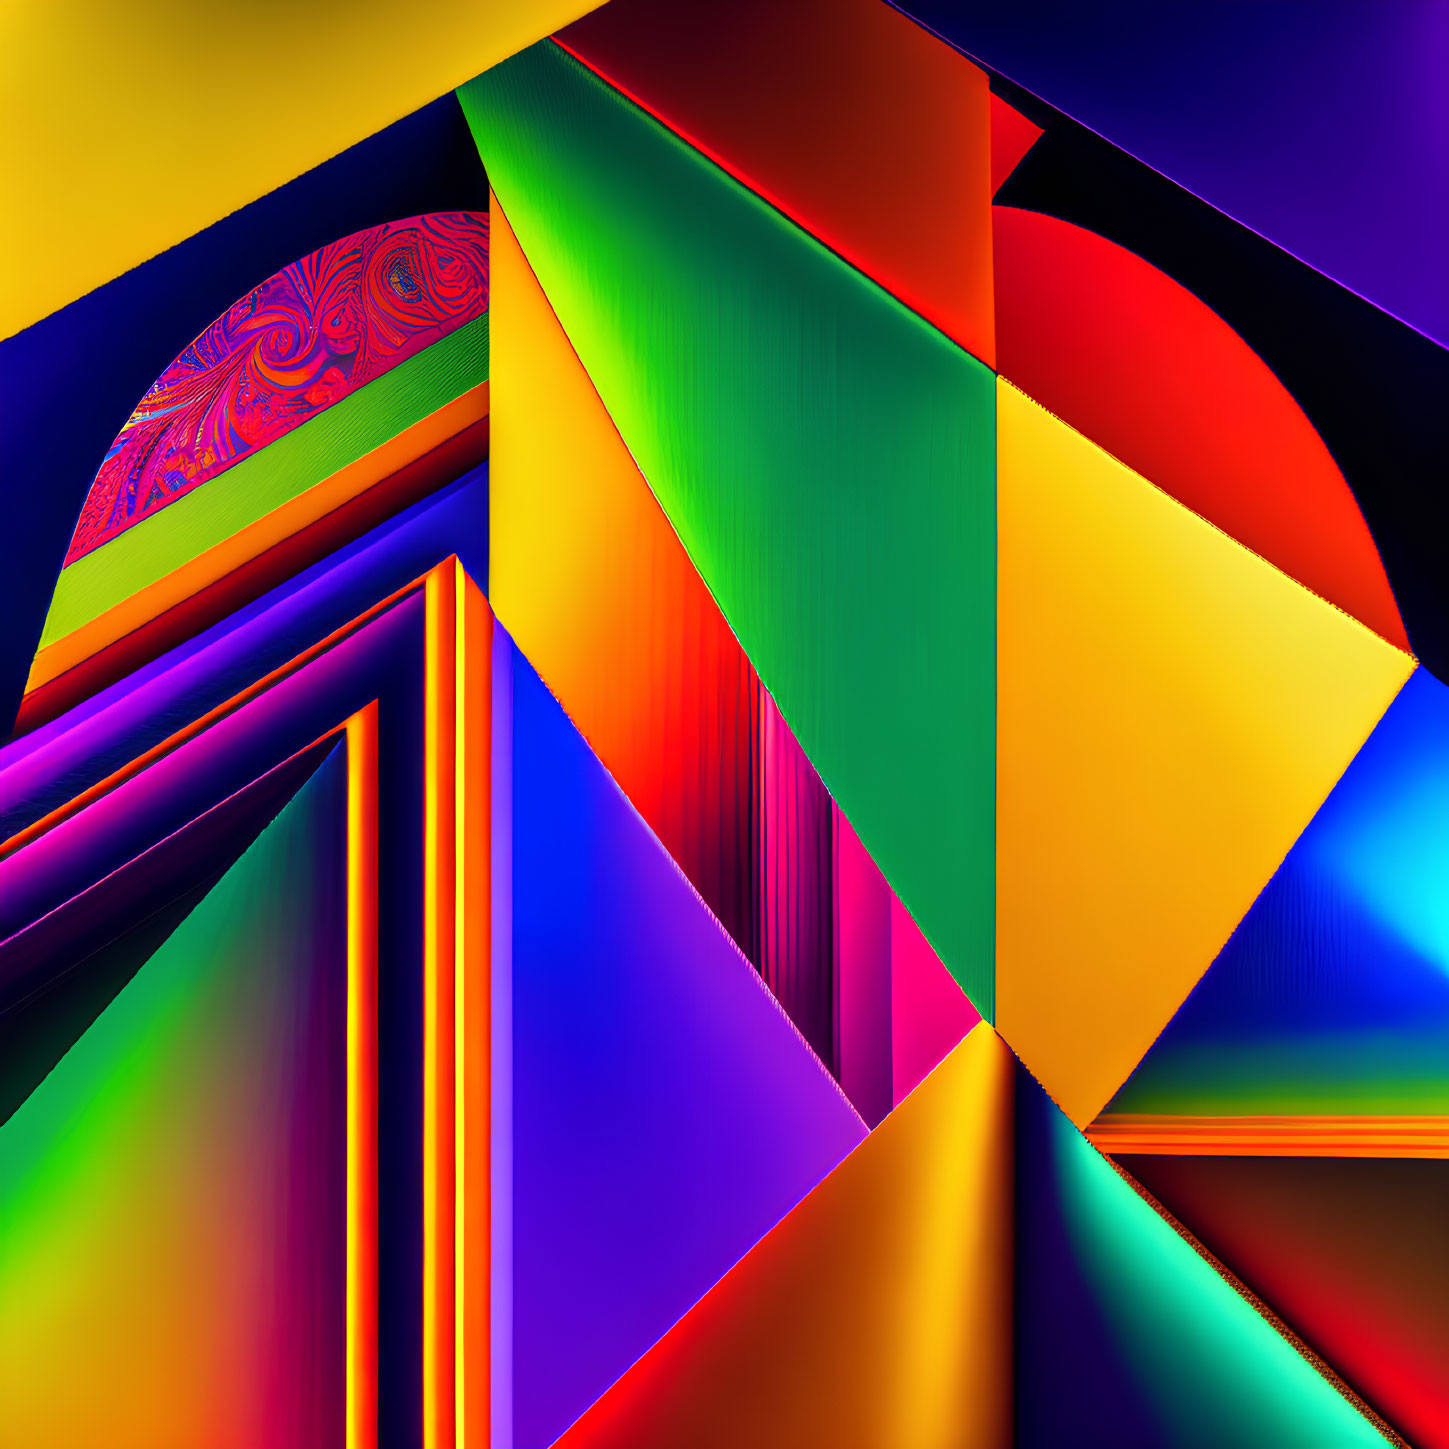 Colorful Geometric Shapes in Abstract Composition